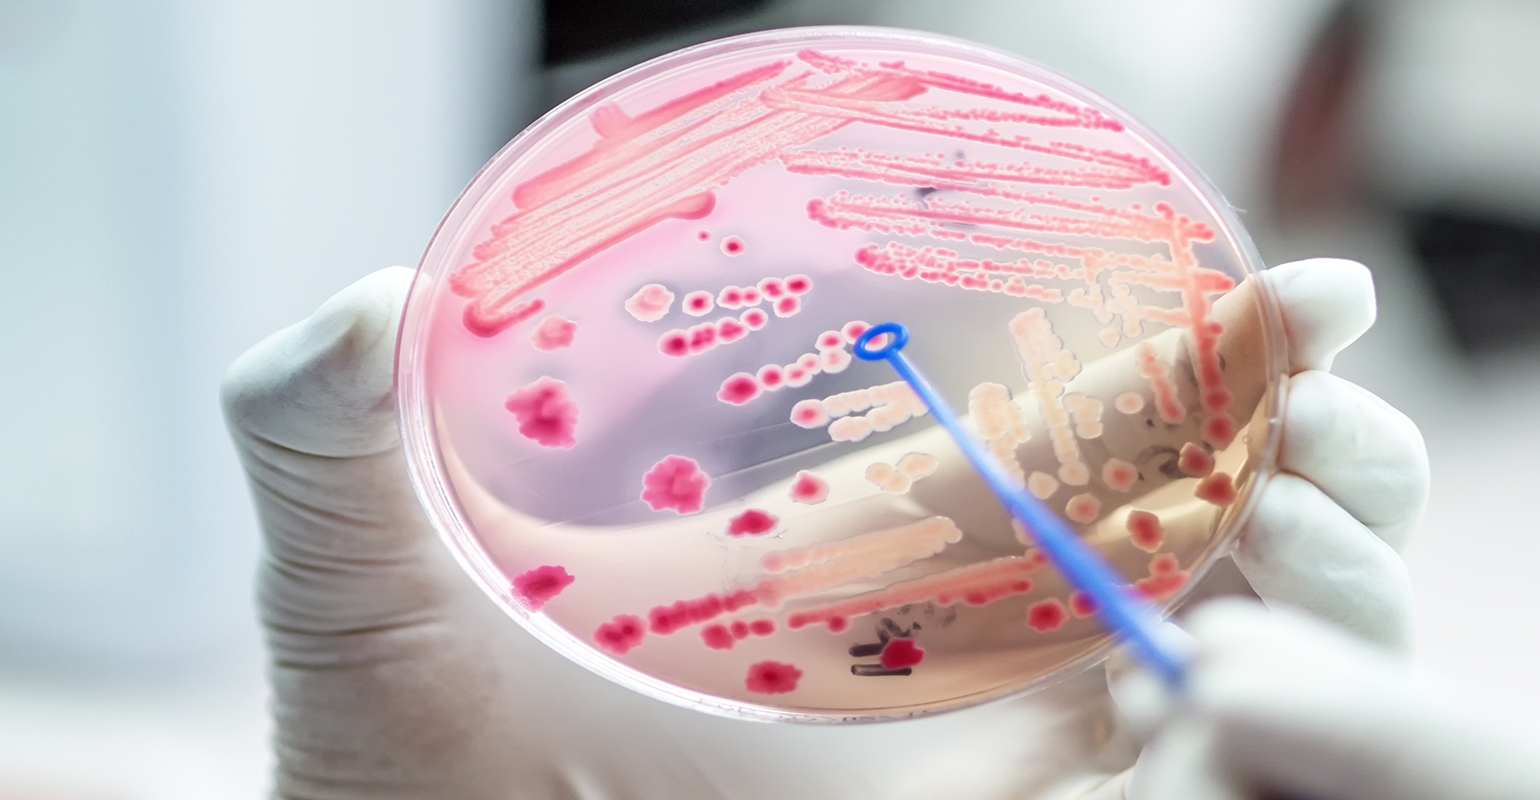 Antimicrobial resistance: a global threat